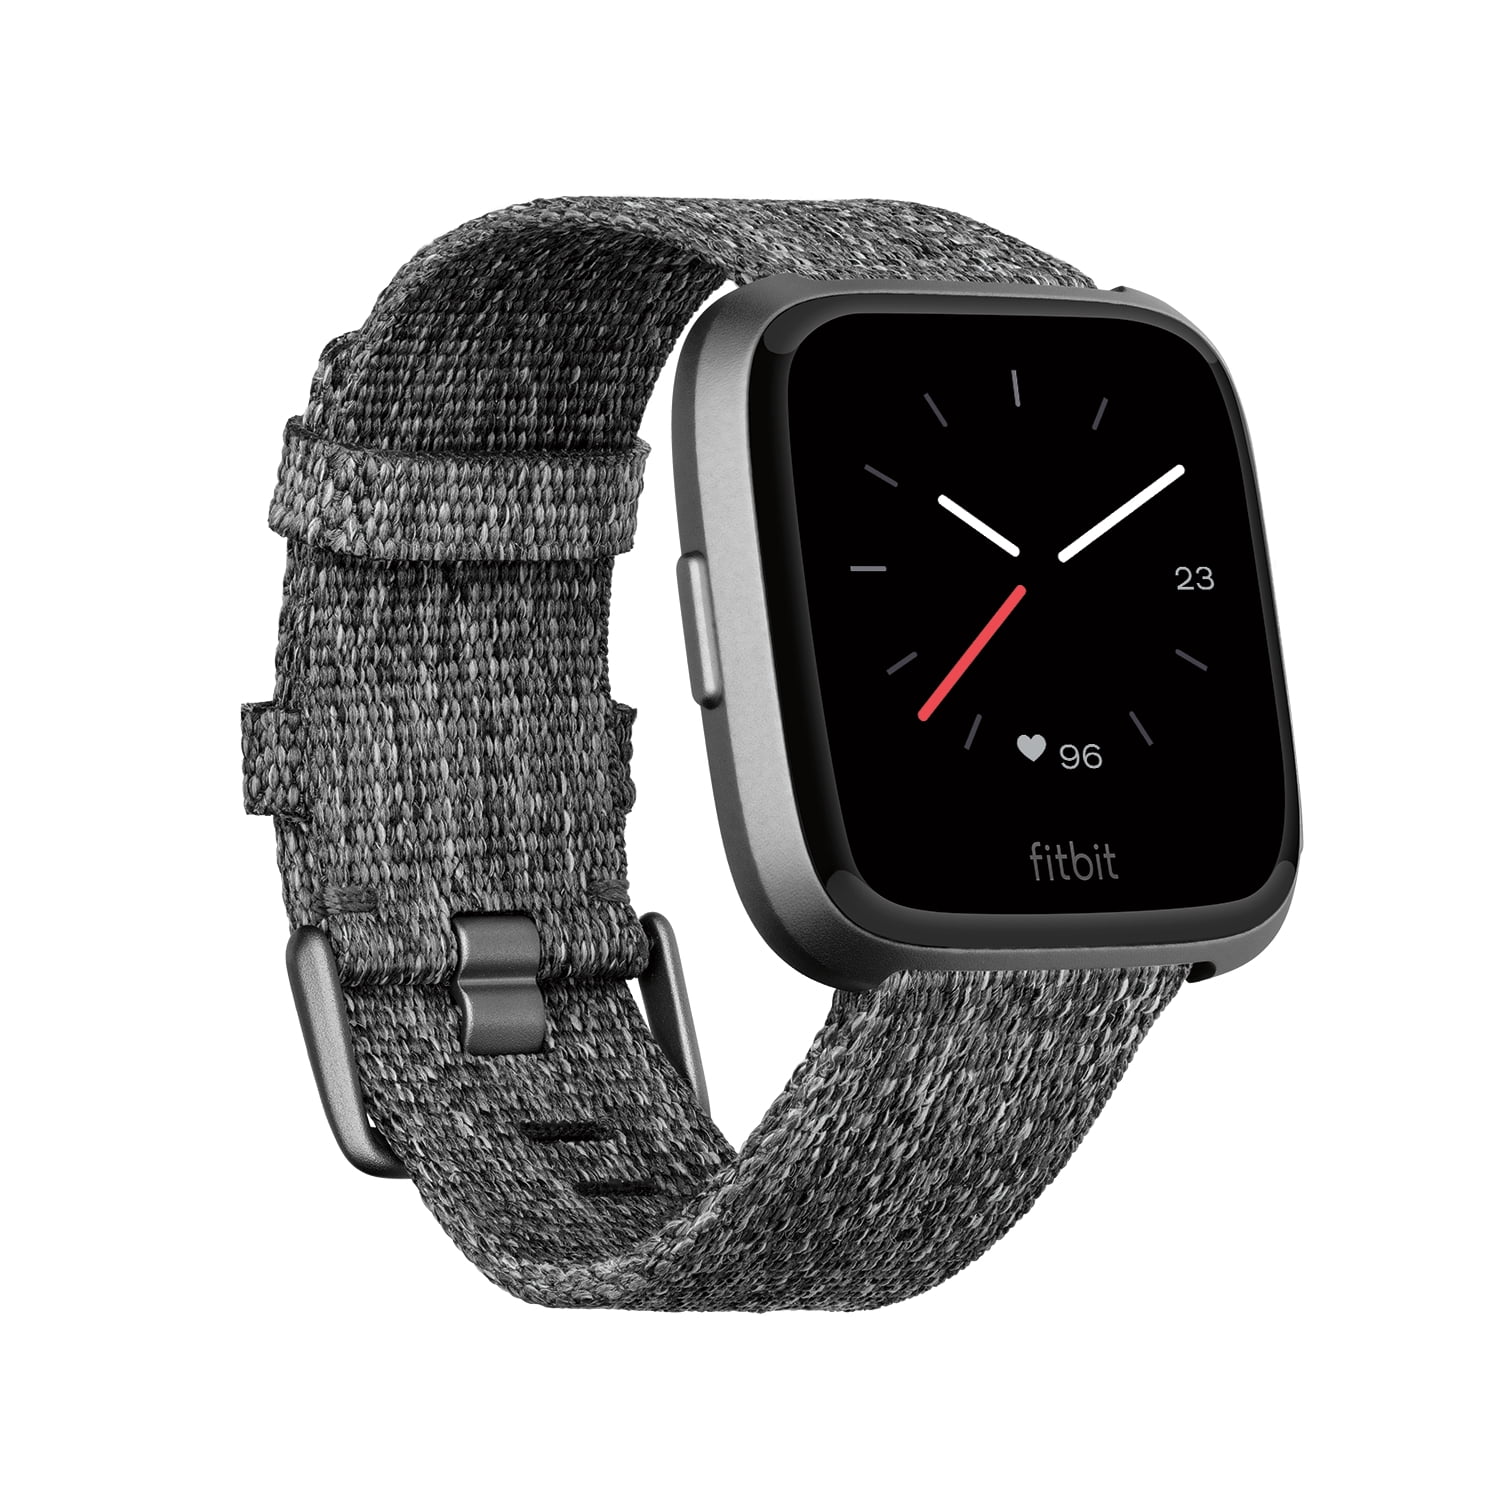 Fitbit Versa Special Edition Smartwatch Fitness Activity Tracker with Woven band 